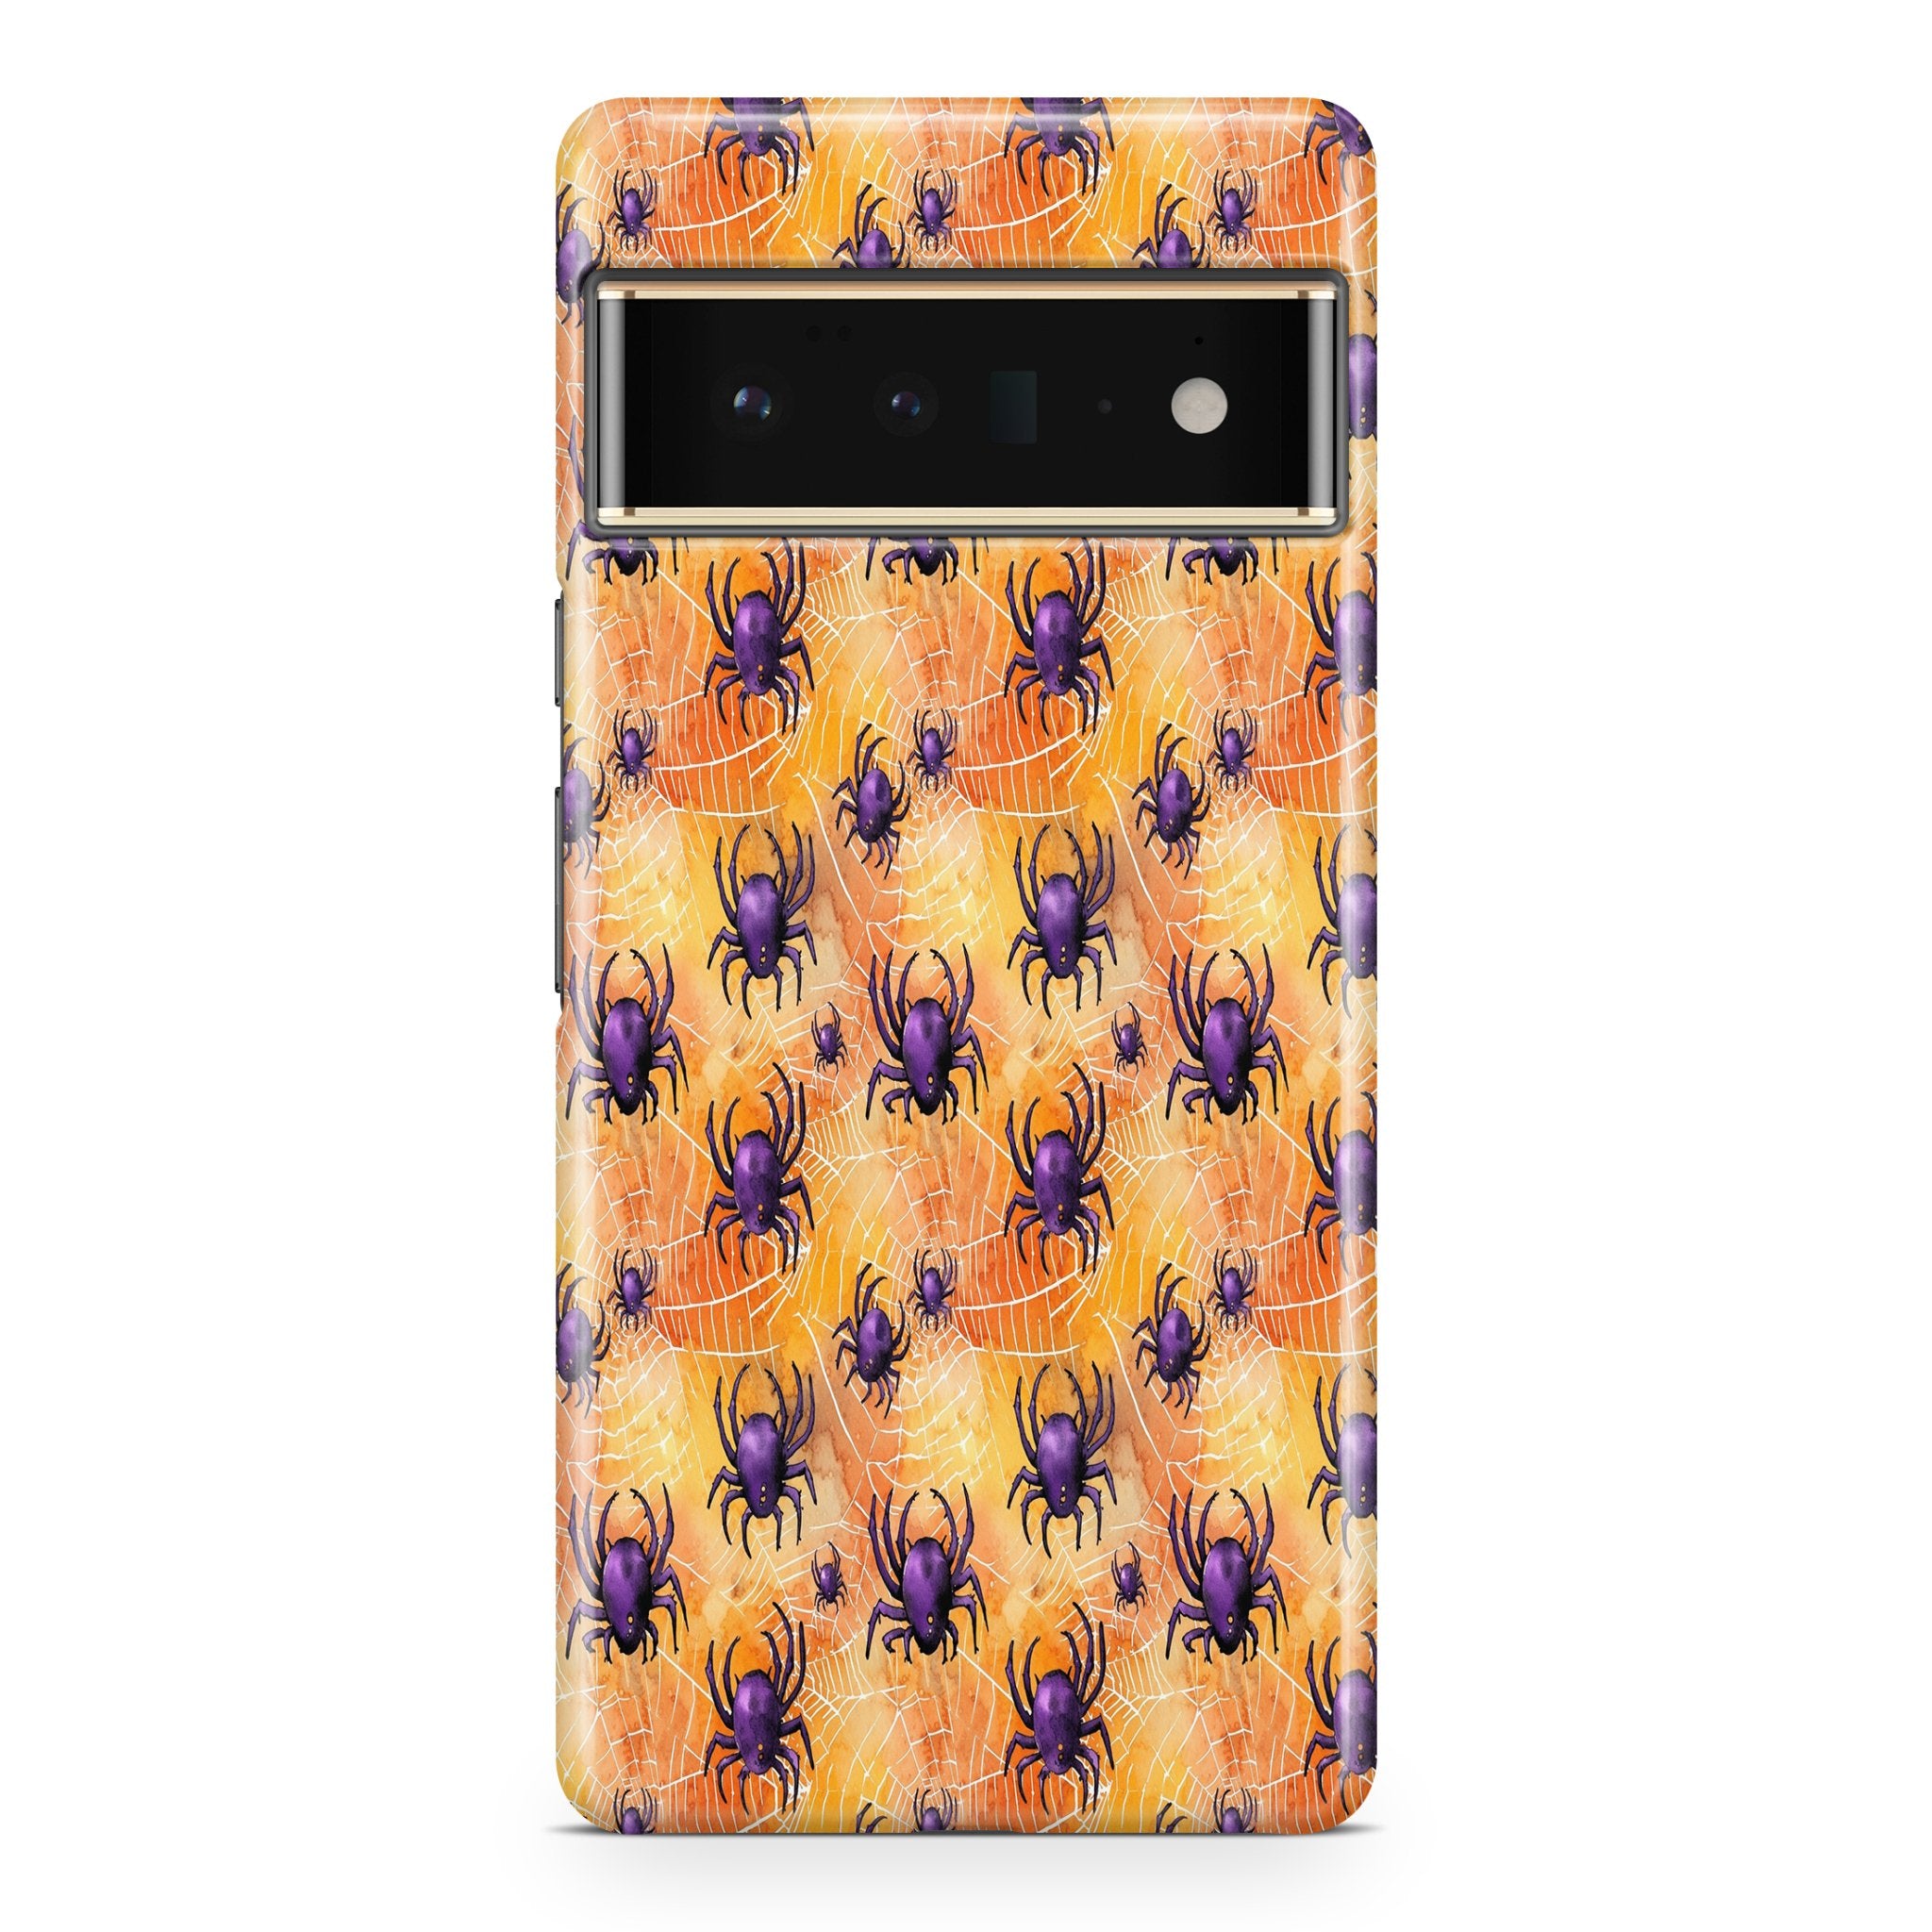 Halloween Creepers - Google phone case designs by CaseSwagger